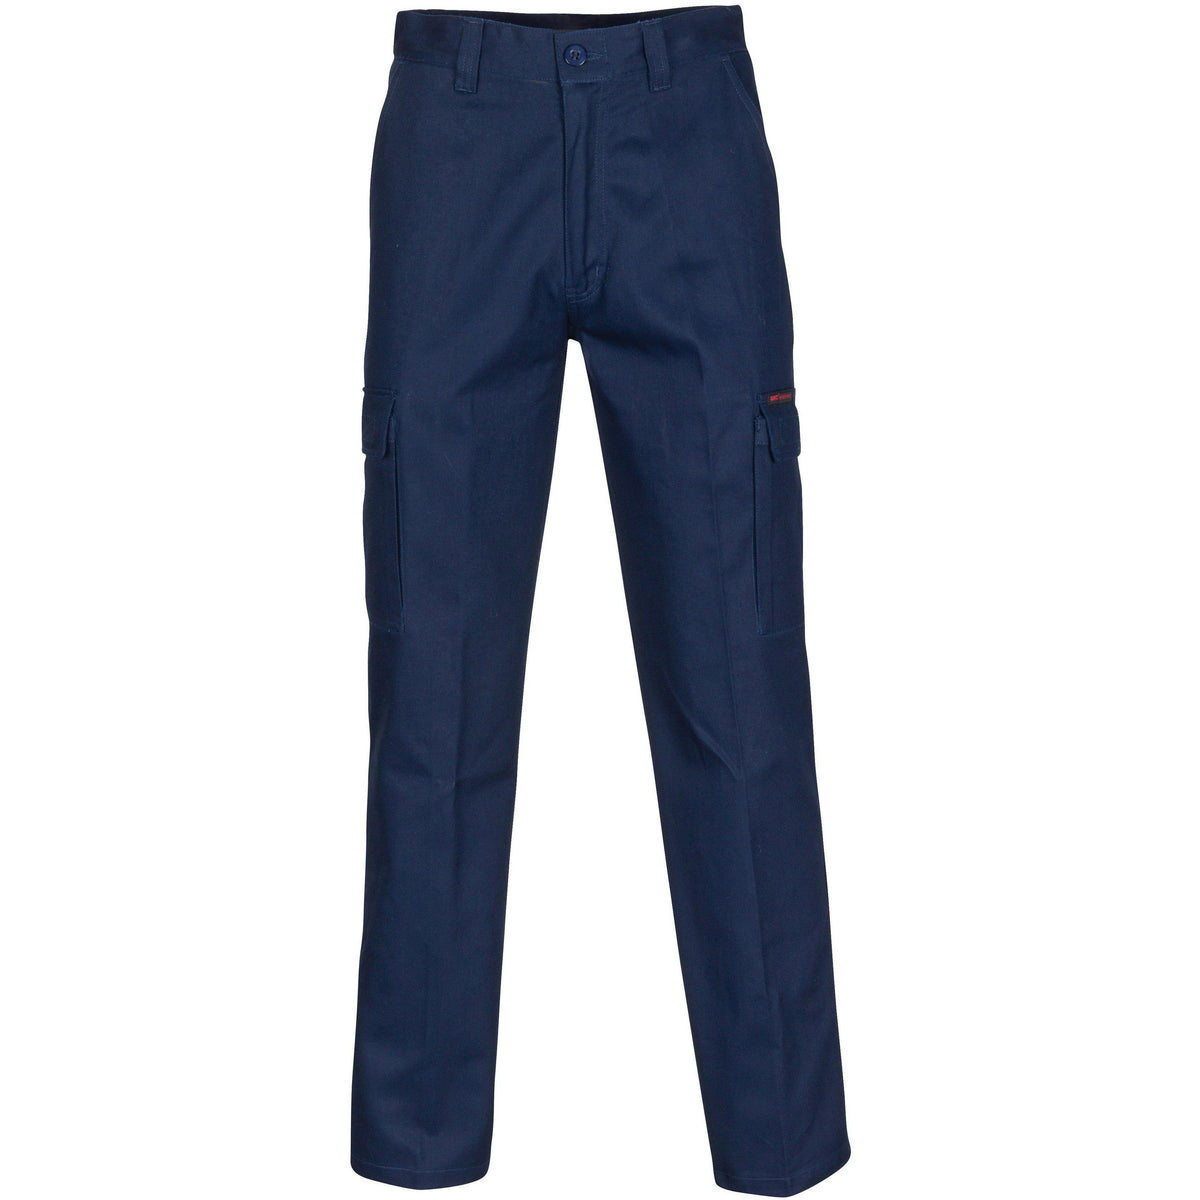 Buy DNC Middle Weight Double Slant Cargo Pants - 3359 Online ...